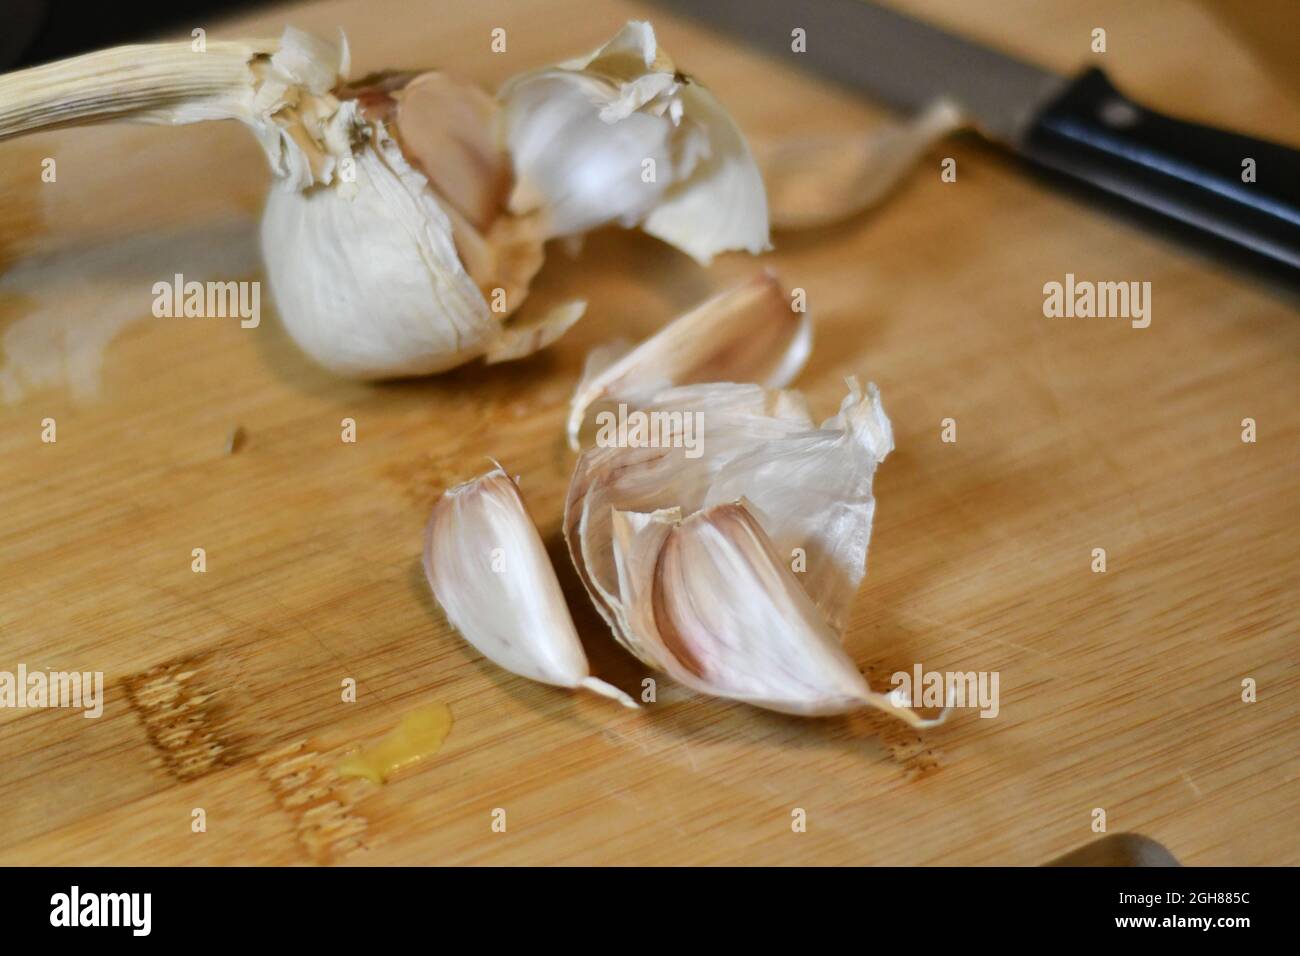 Freshly cut garlic cloves, allium sativum, as they have been extracted from the bulb, sliced on a wooden bread board in a domestic kitchen Stock Photo